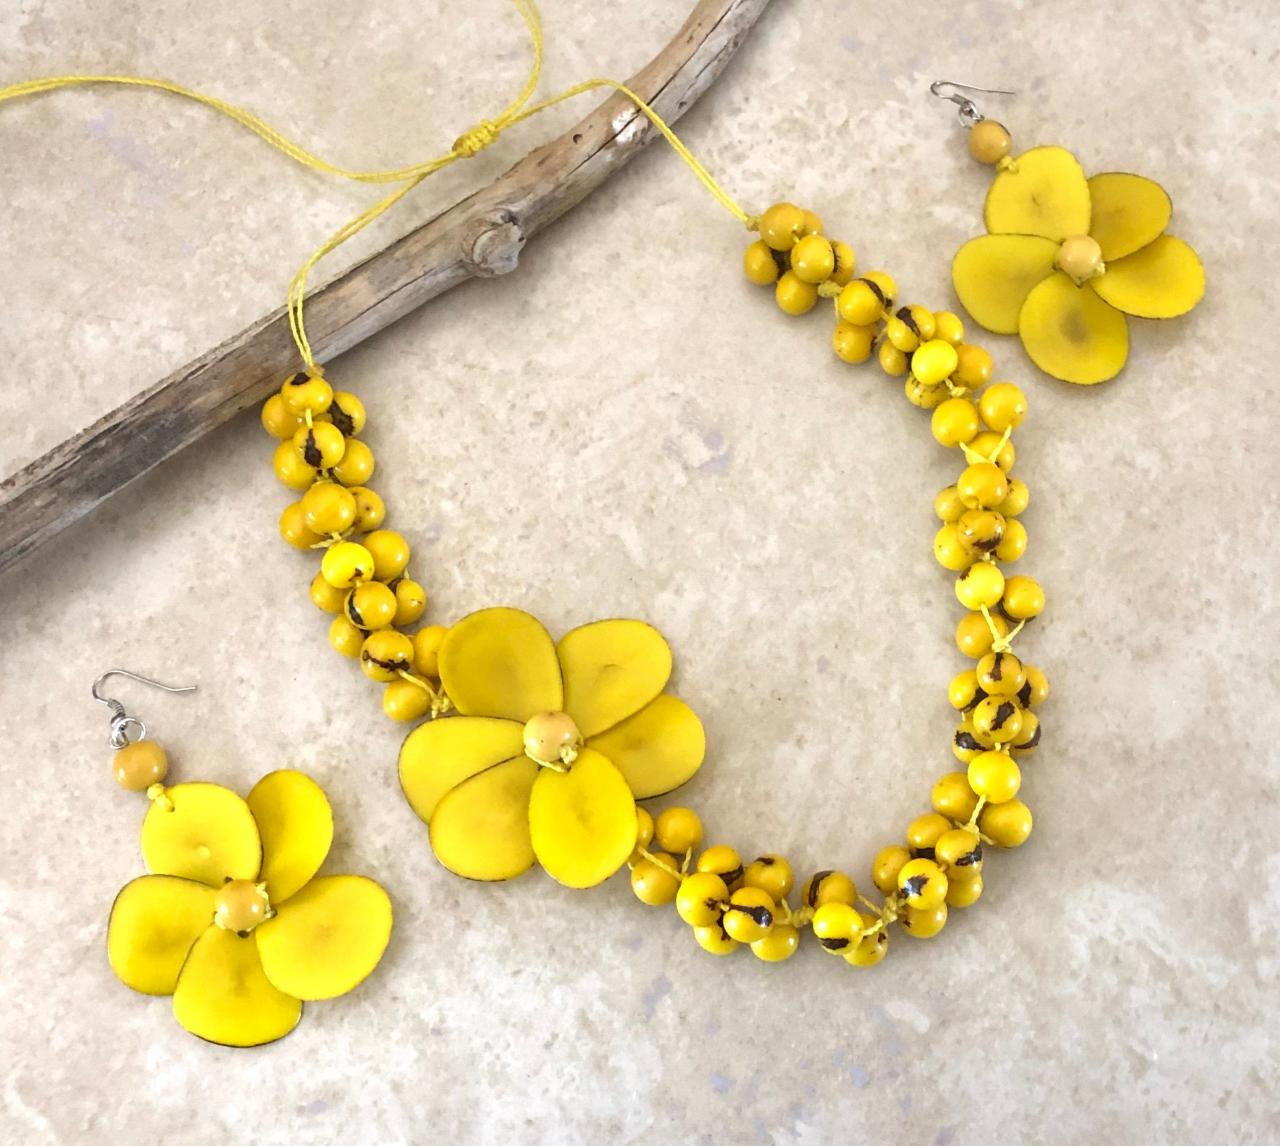 Yellow Tagua Necklace And Earrings, Acai Seeds Necklace, Summer Necklace, Vegan Necklace, Flower Necklace, Beach Necklace, Statement